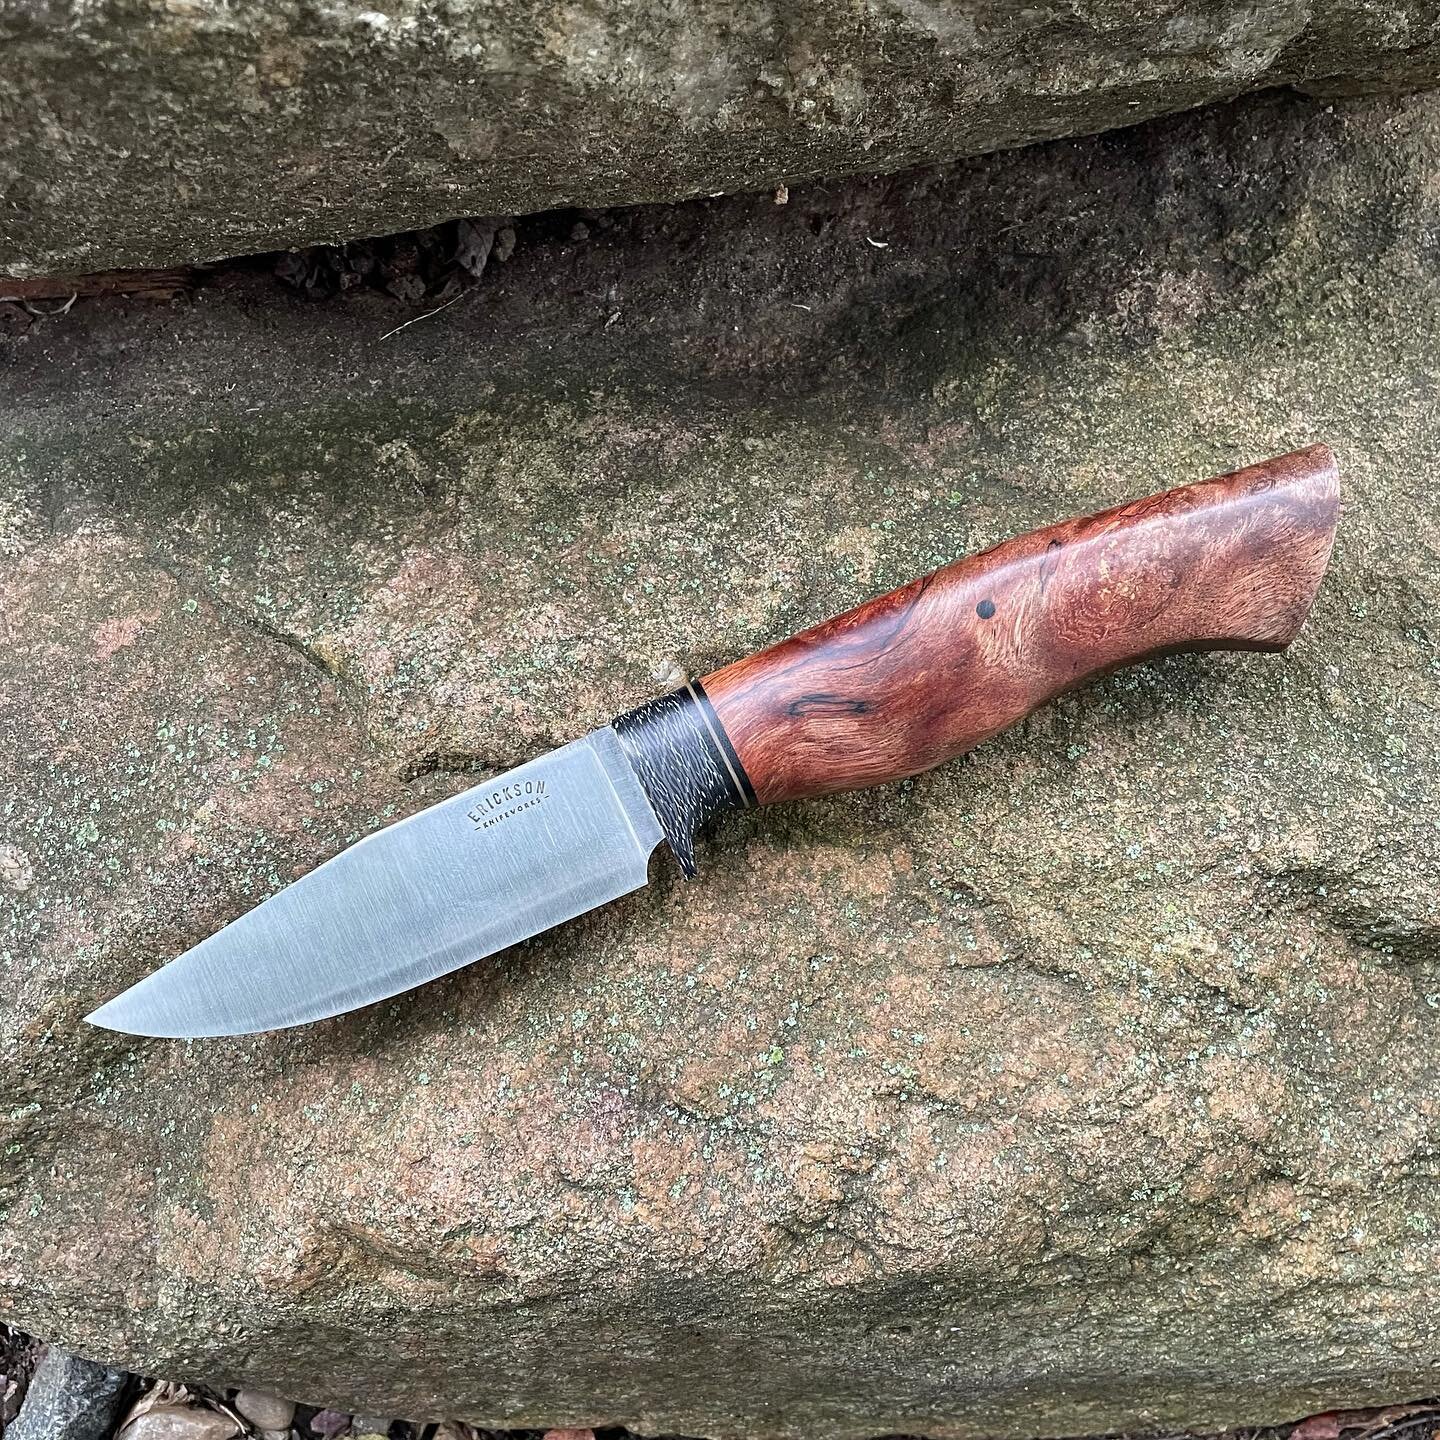 Now sold

I have a clip point hunter up for sale here tonight. It's Z wear tool steel that is heat treated to RC63 including LN cryo treatment. The spalted Rambutan burl is rare and beautiful. I found a small block of it a year or so ago and recently